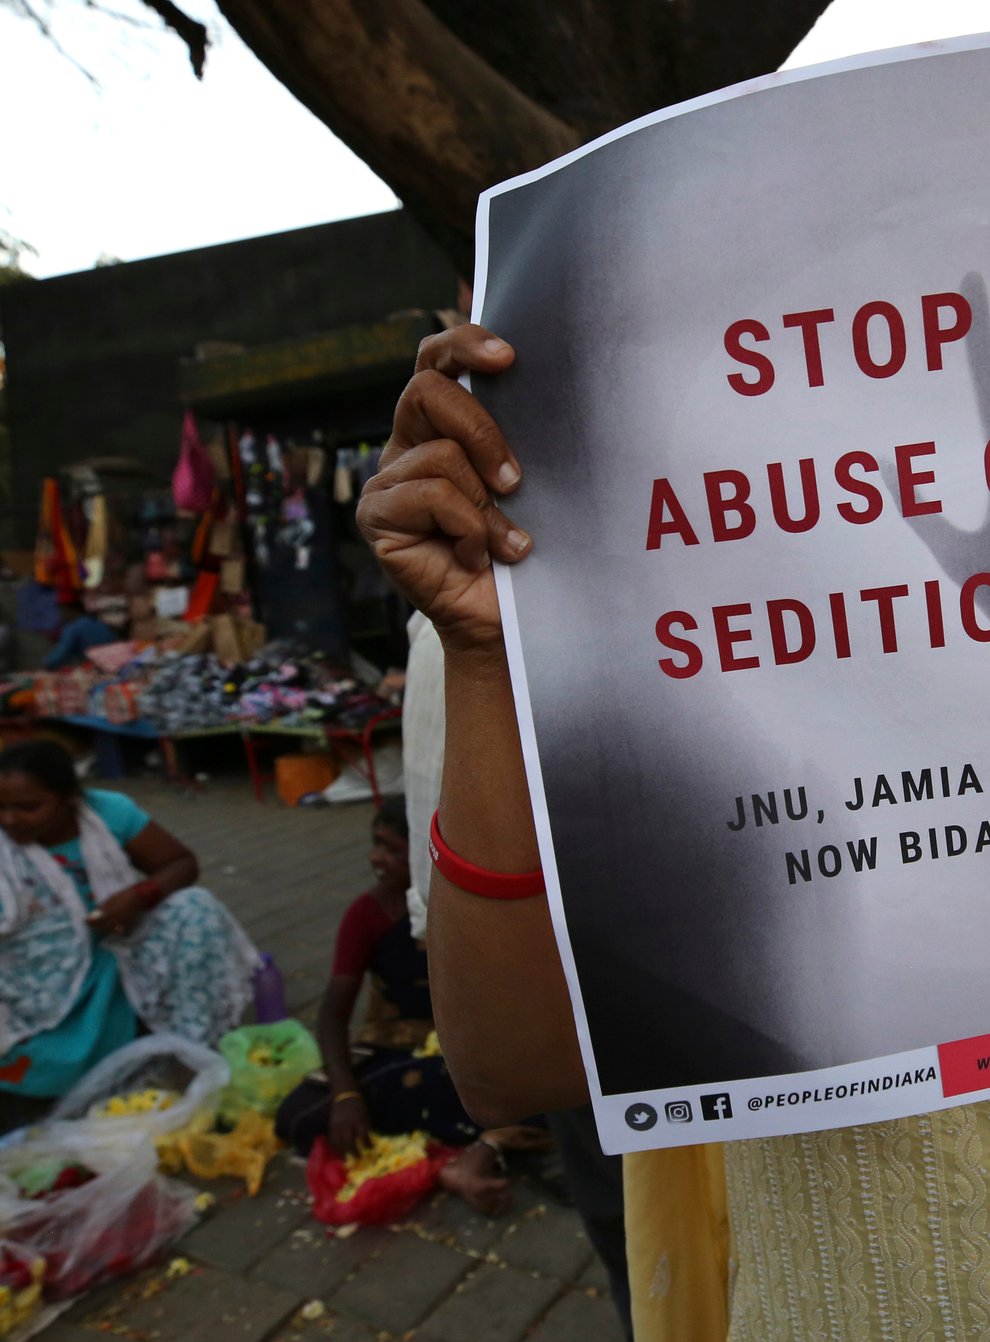 A woman holds a placard protesting against a sedition case in Bangalore, India, in 2020 (Aijaz Rahi/AP)